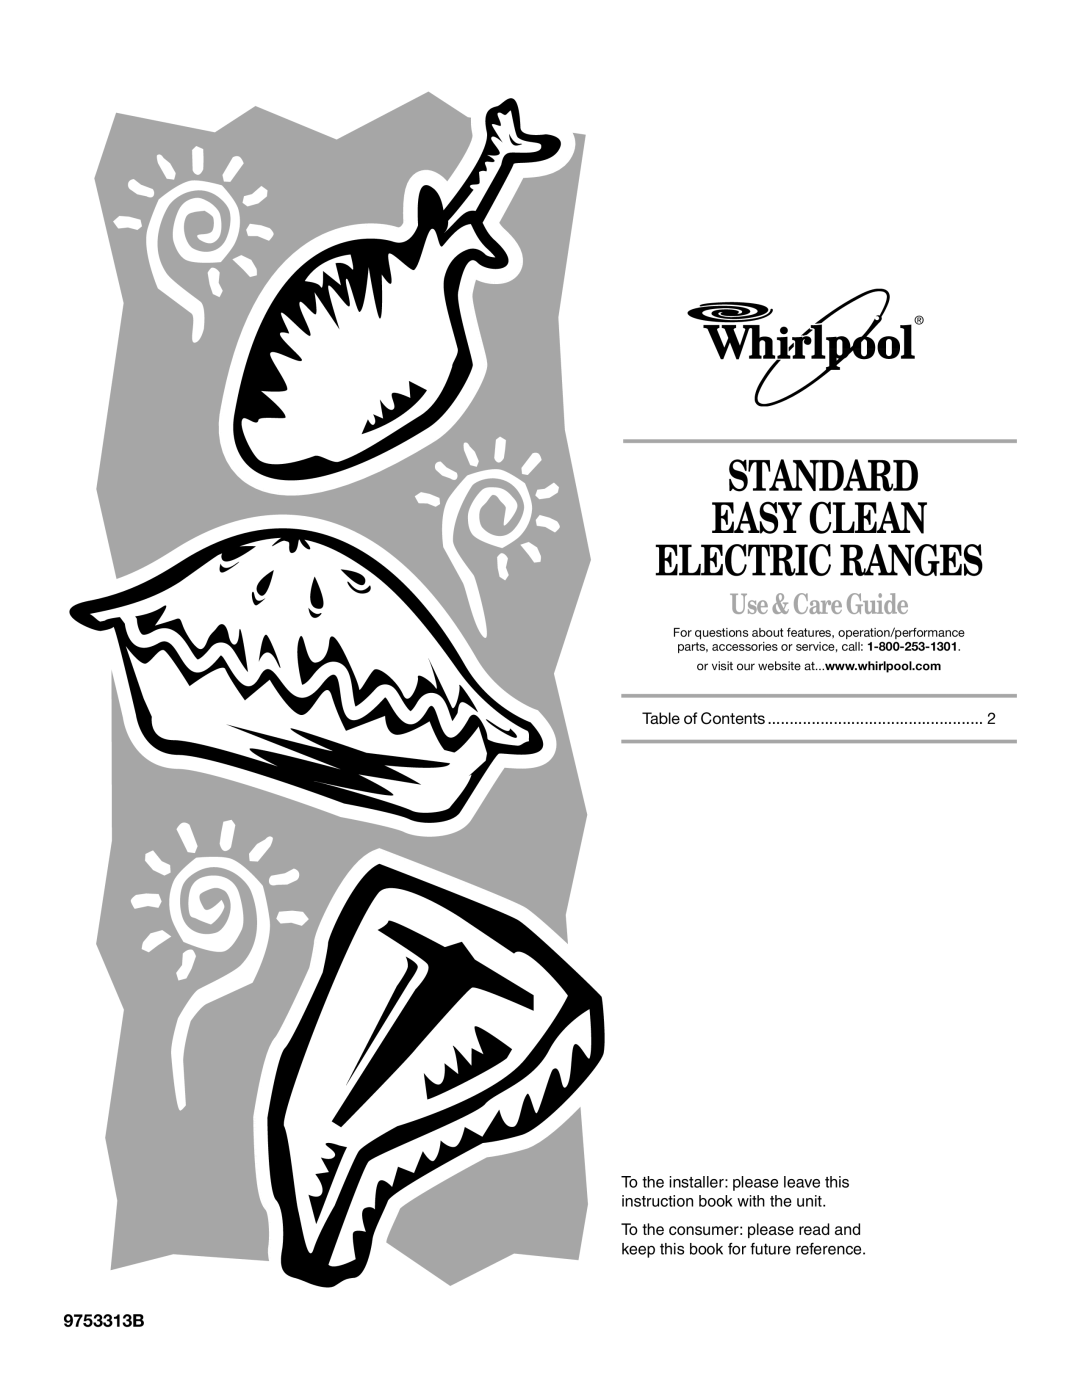 Whirlpool 9753313B manual Standard Easy Clean Electric Ranges, Use &Care Guide 